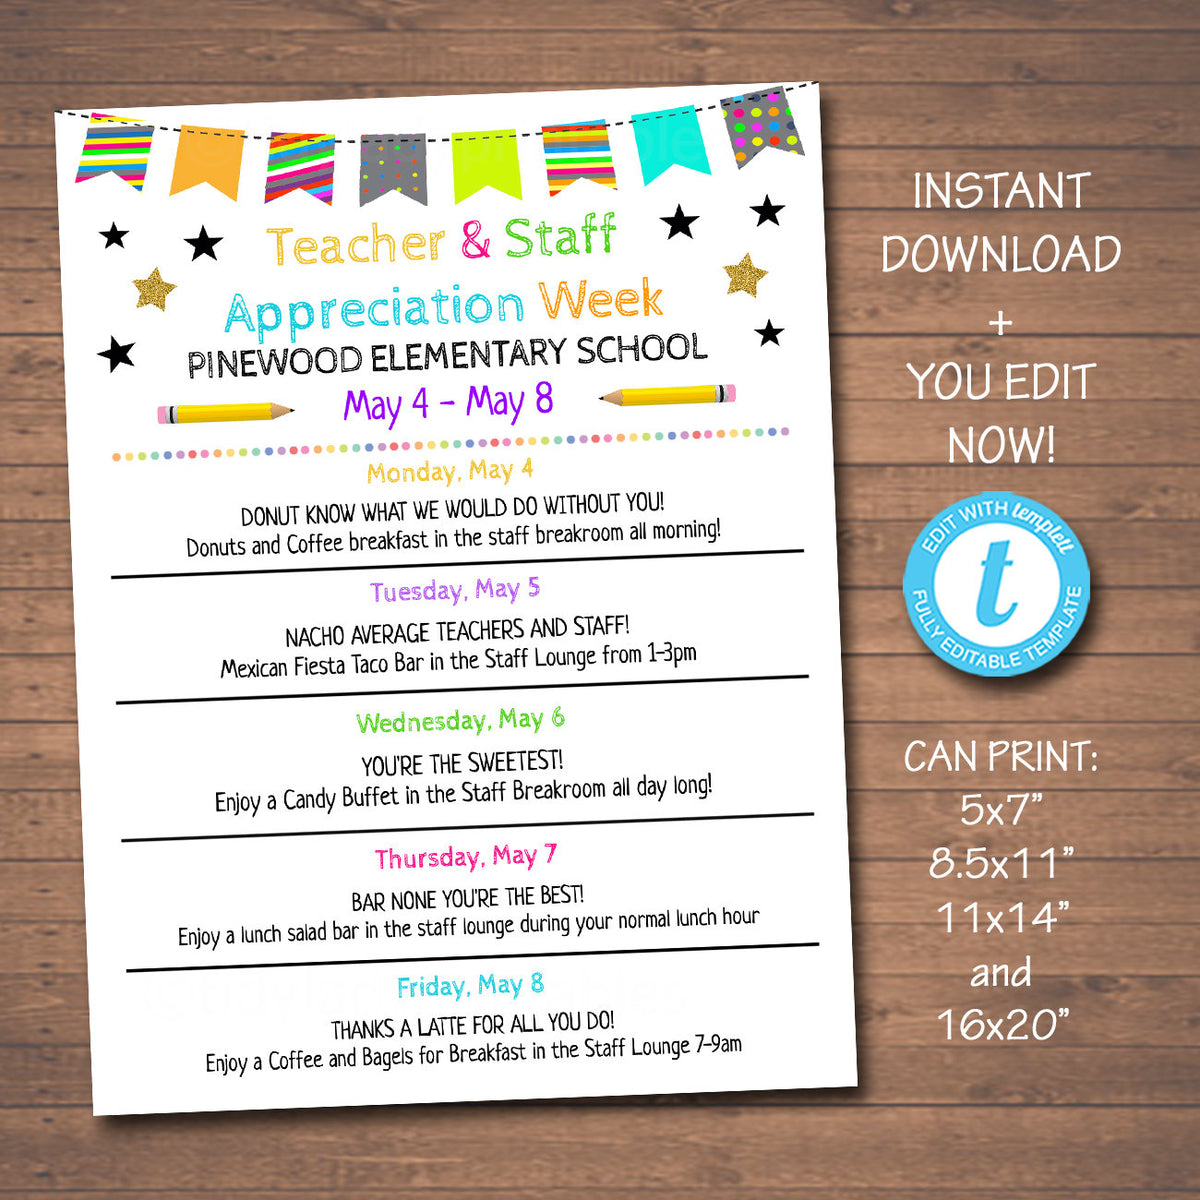 Teacher Appreciation Week Schedule Of Events Printable TidyLady